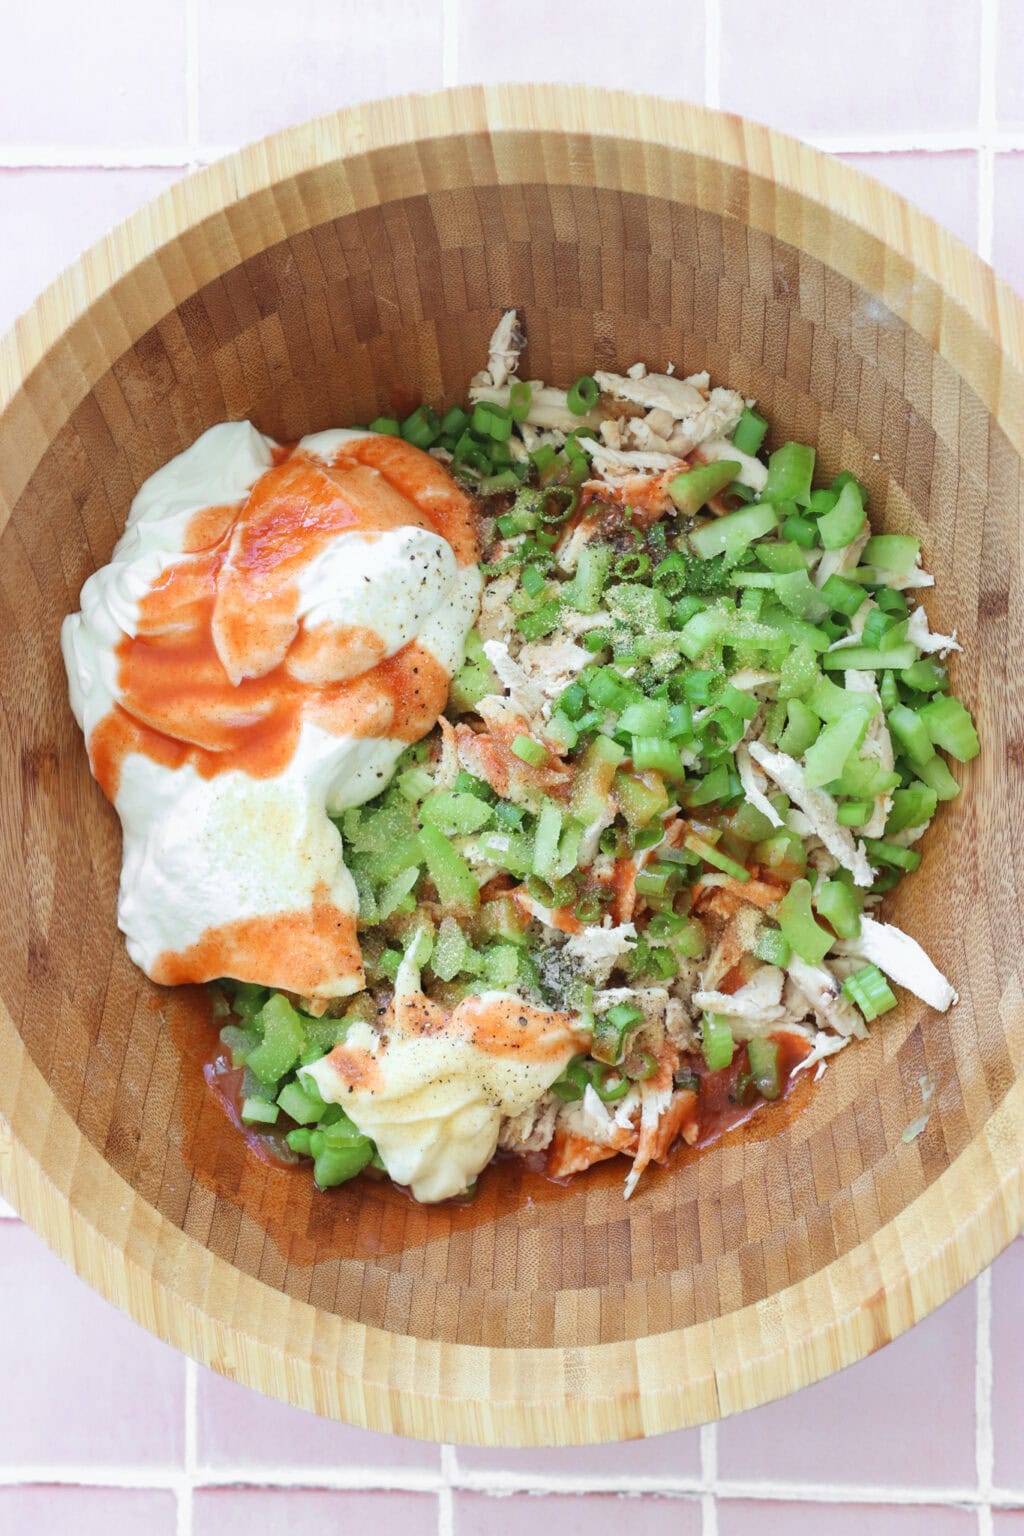 Ingredients for Quick Buffalo Chicken Salad with Greek Yogurt unmixed in a medium wooden bowl including cooked shredded chicken, Greek yogurt, mayo, Frank's Red Hot Original Sauce, garlic powder, green onions, blue cheese, pepper